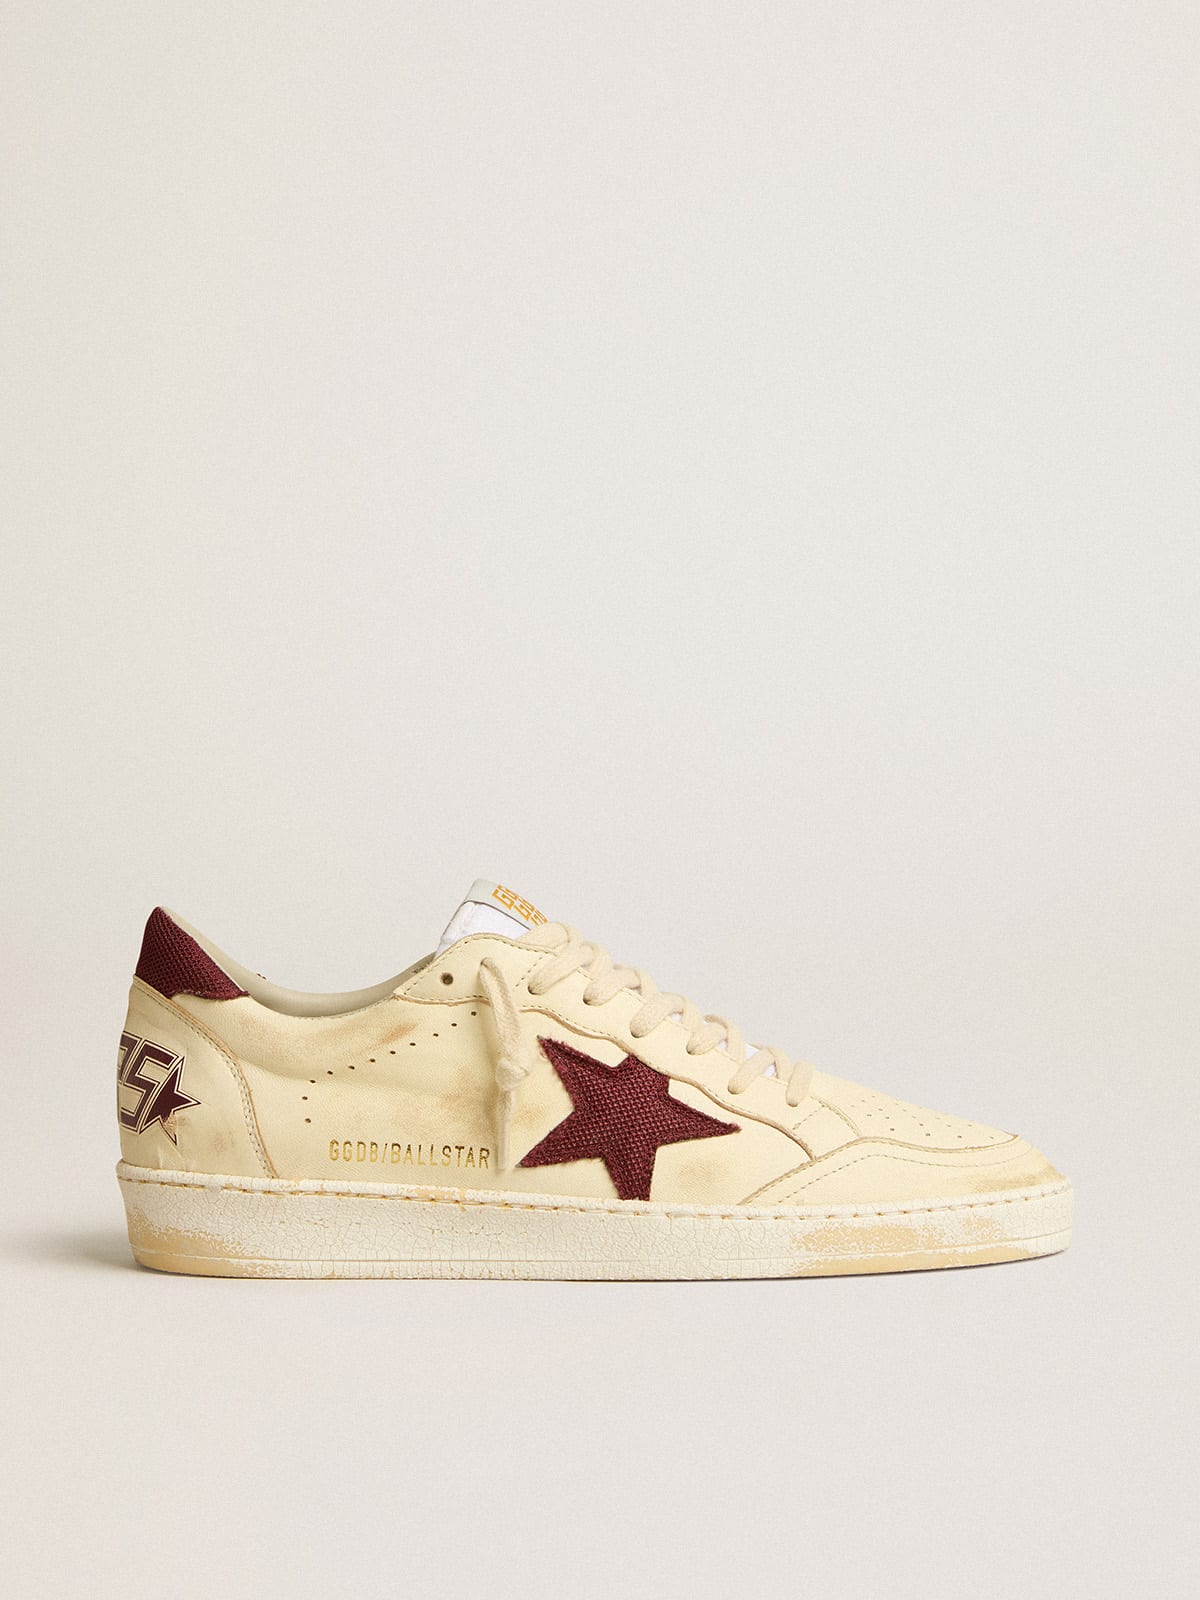 Golden Goose - Ball Star in beige nappa with burgundy mesh star and heel tab in 